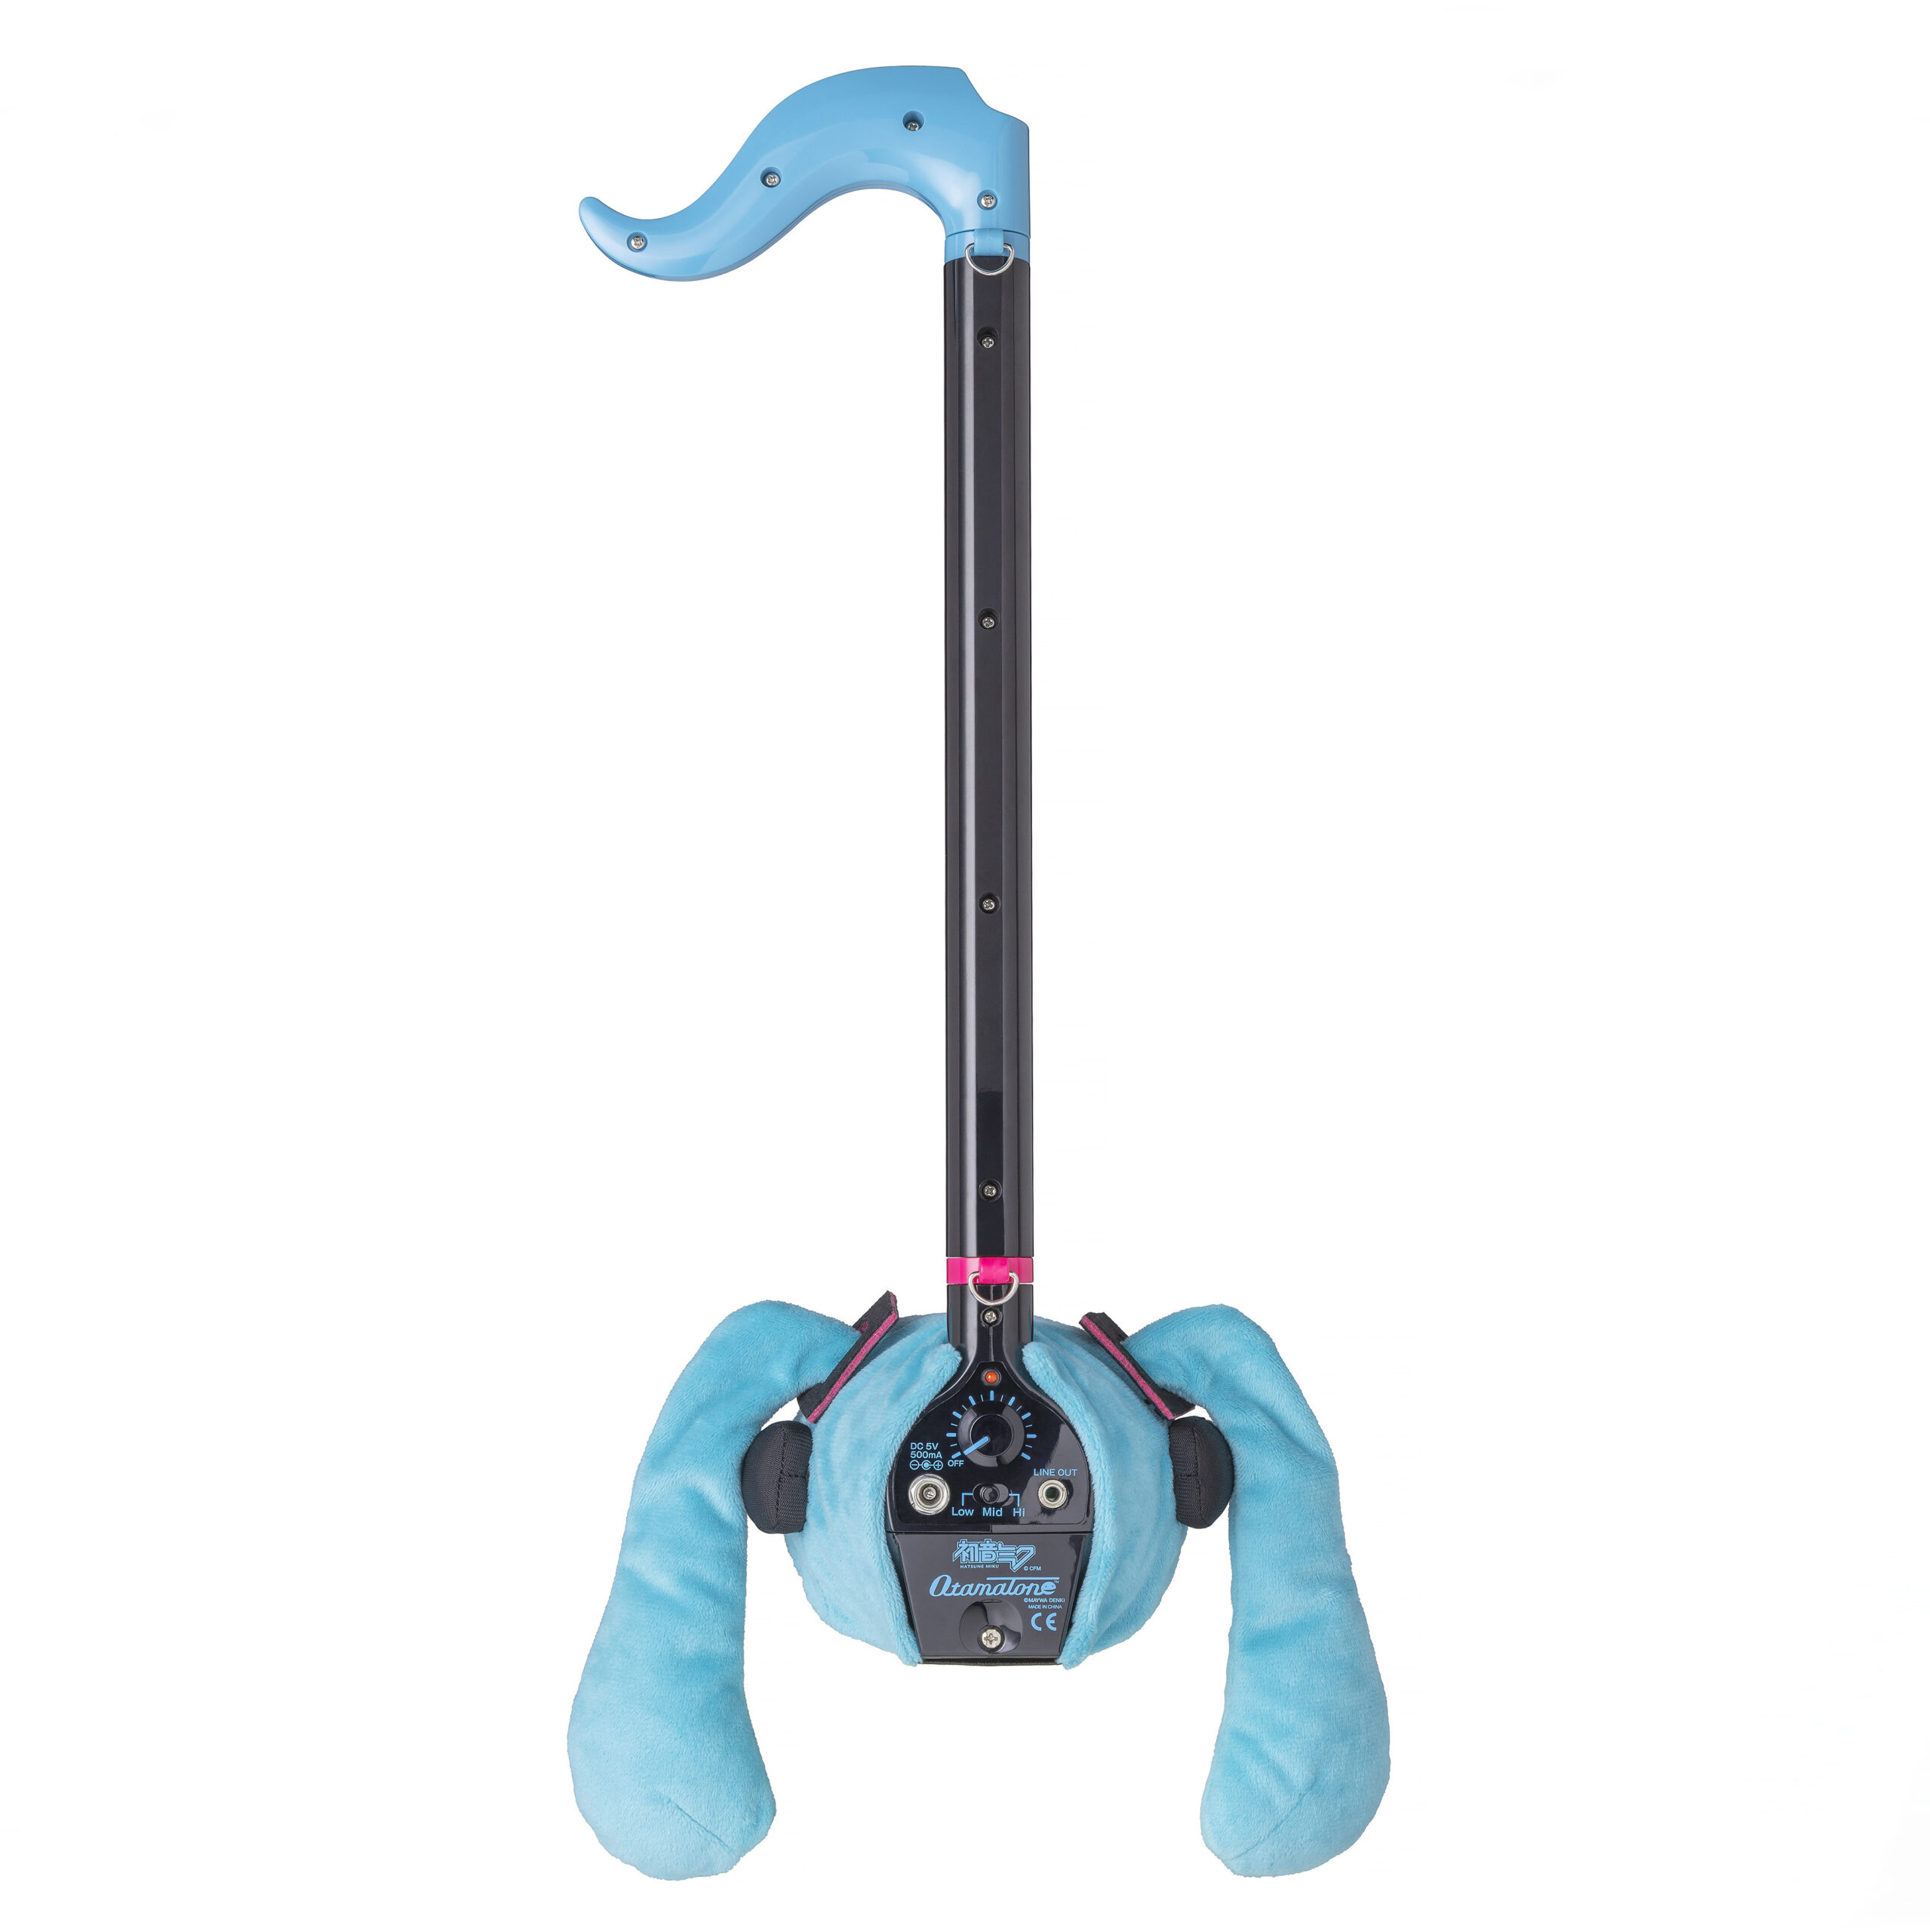 [ most short next day delivery ]otama tone Deluxe Hatsune Miku Ver. practice seat & battery attached Otamatone DX HATSUNE MIKU Ver. Meiwa electro- machine [ piano pra The one pushed .!]